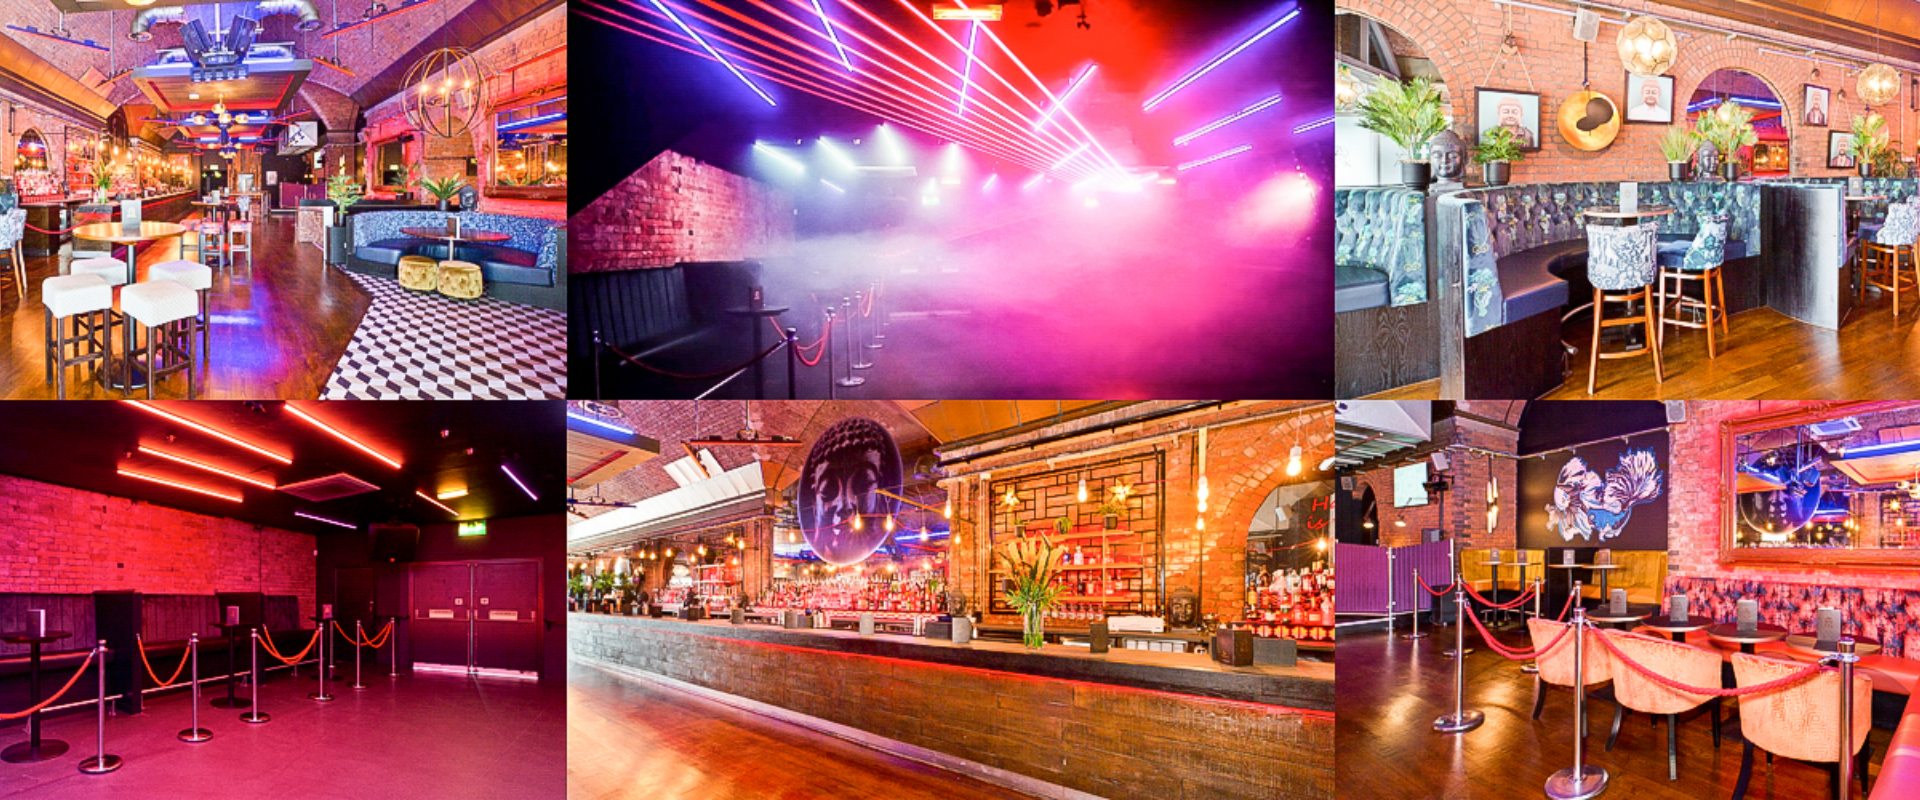 Images of Ark Manchester's Bar Area